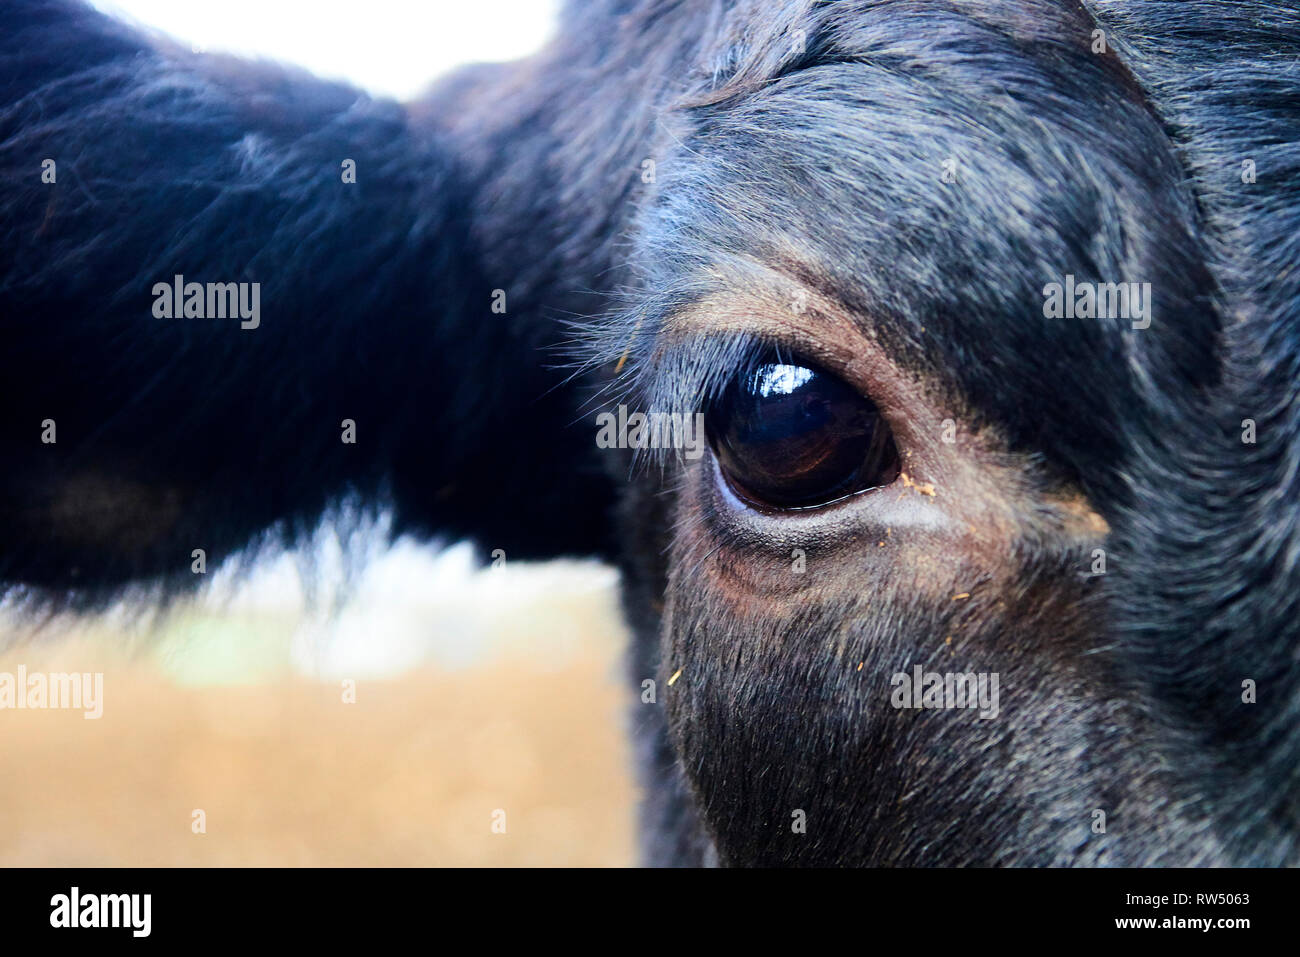 Close up of black cow head and eye Stock Photo